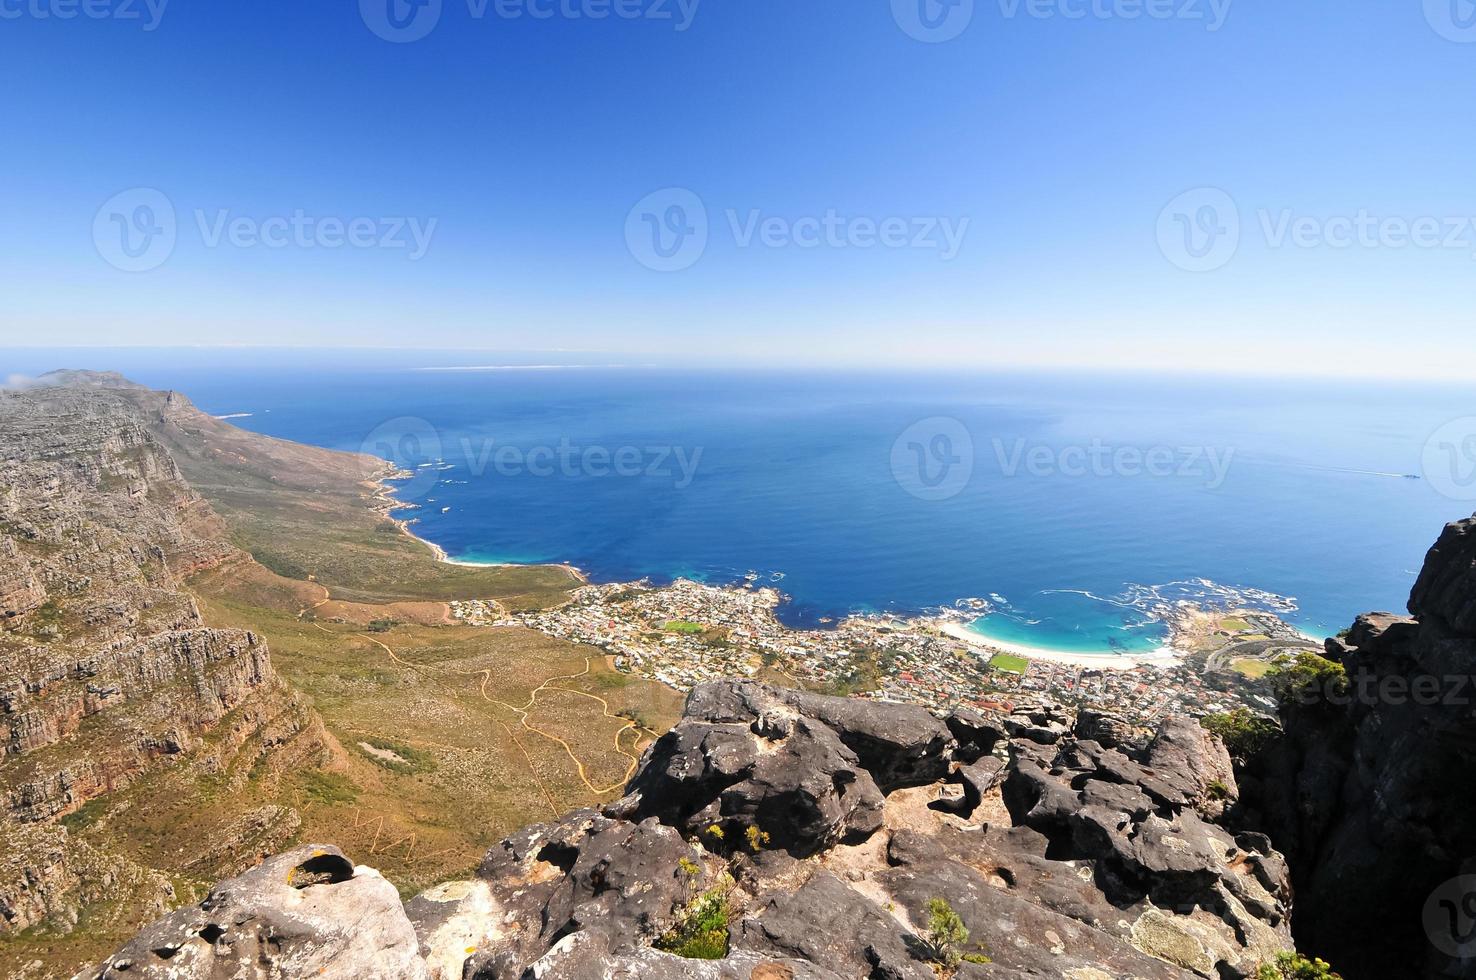 Table Mountain in Cape Town photo